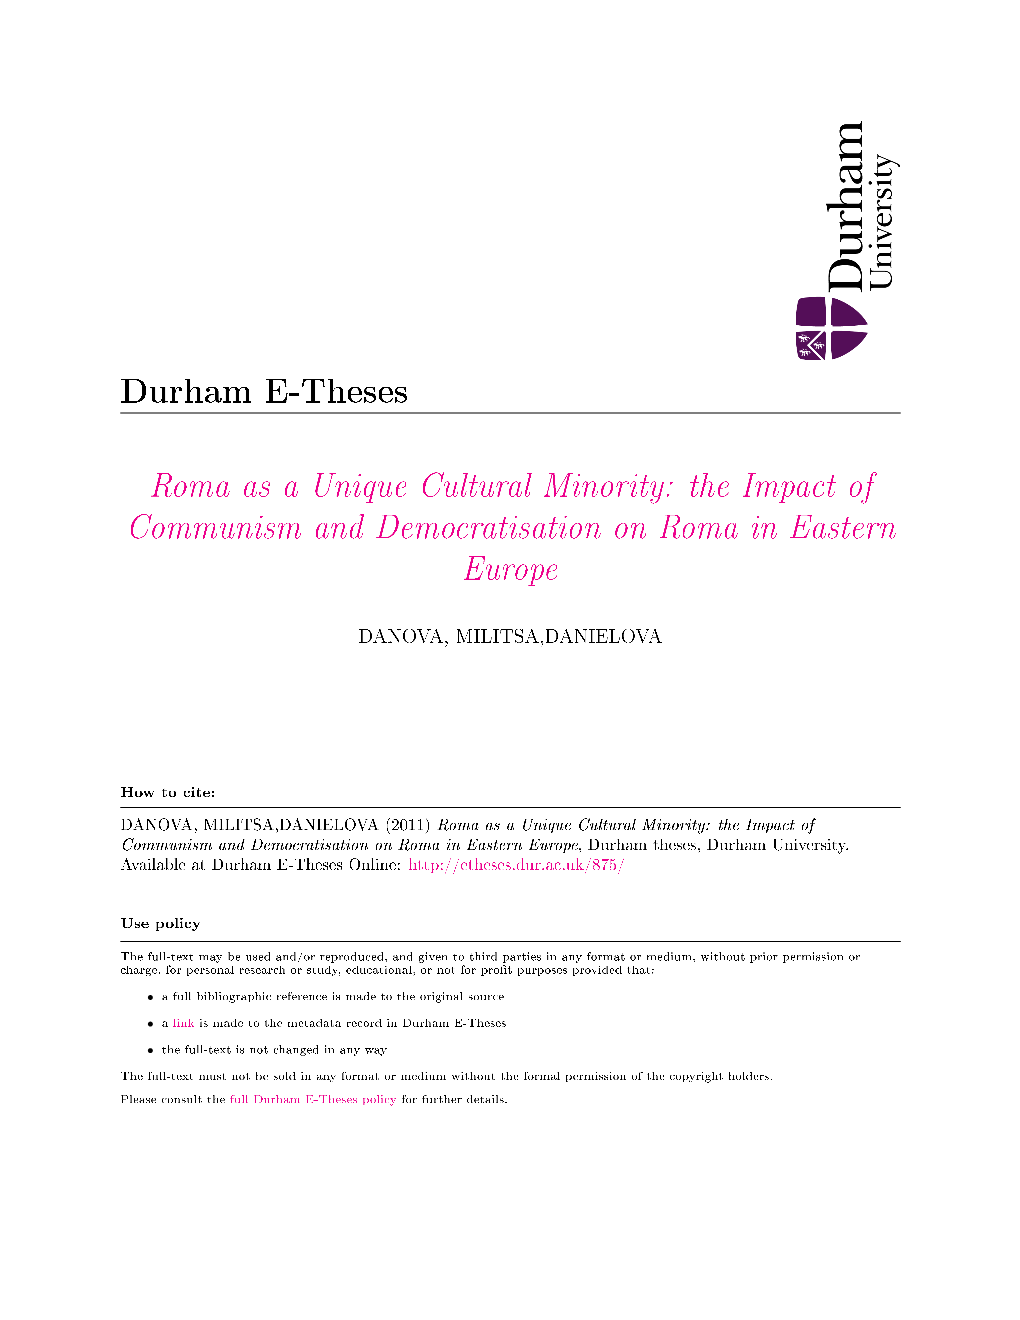 Roma As a Unique Cultural Minority: the Impact of Communism and Democratisation on Roma in Eastern Europe